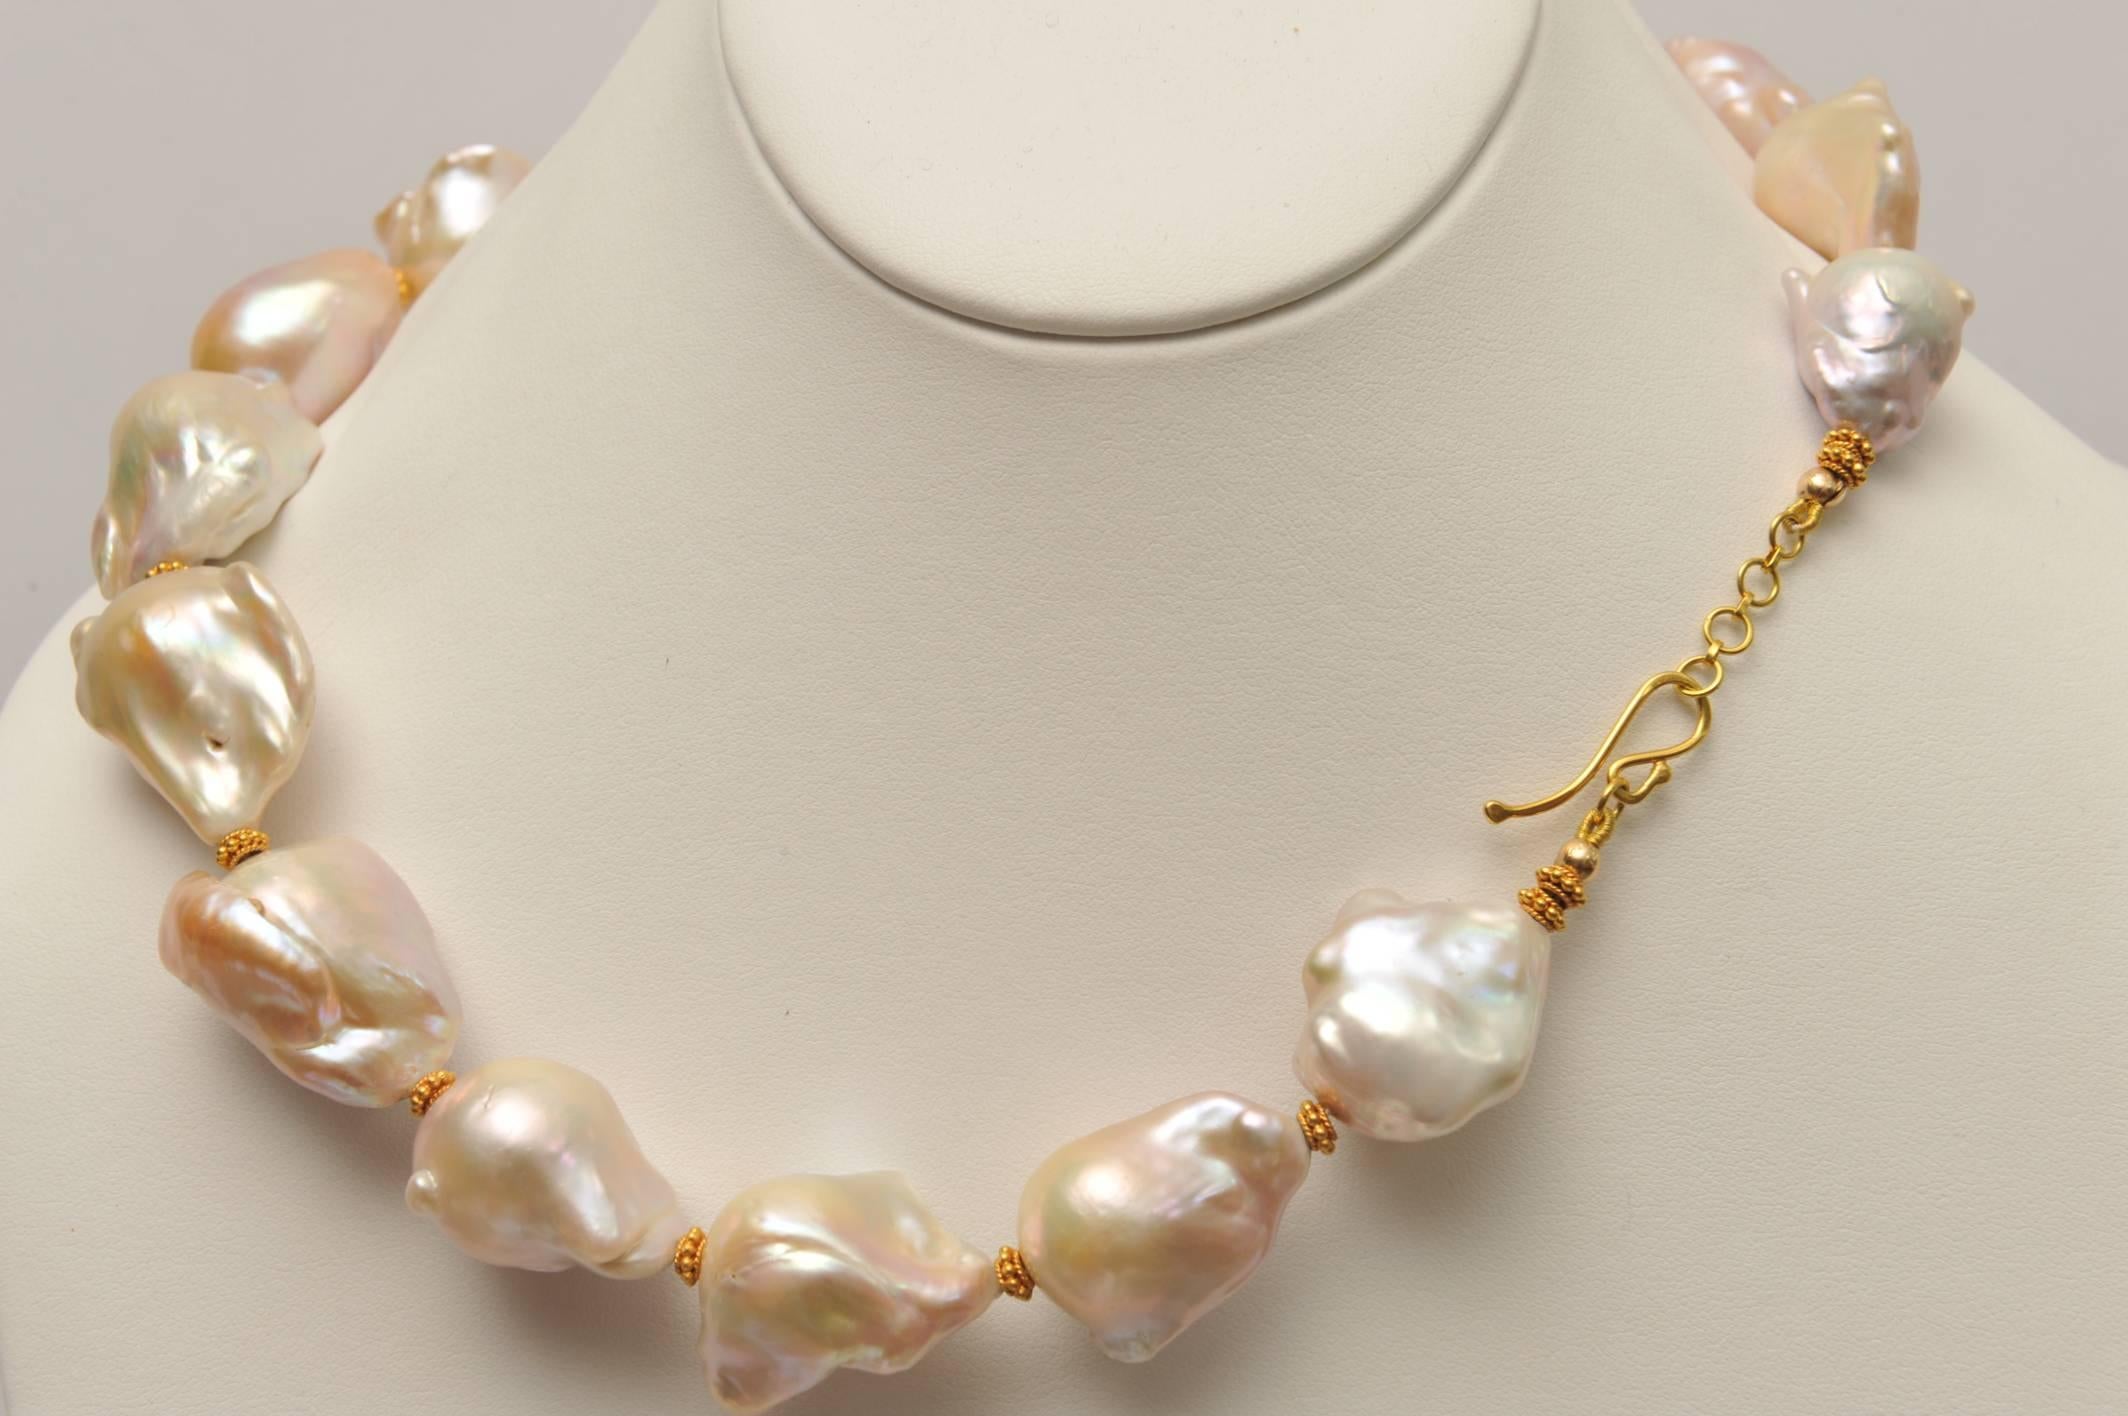 A beautiful strand of 22-30mm, rare blush pink baroque pearls with incredible luster strung with 22K gold spacers with fine granulation work and adjustable length with 3/4